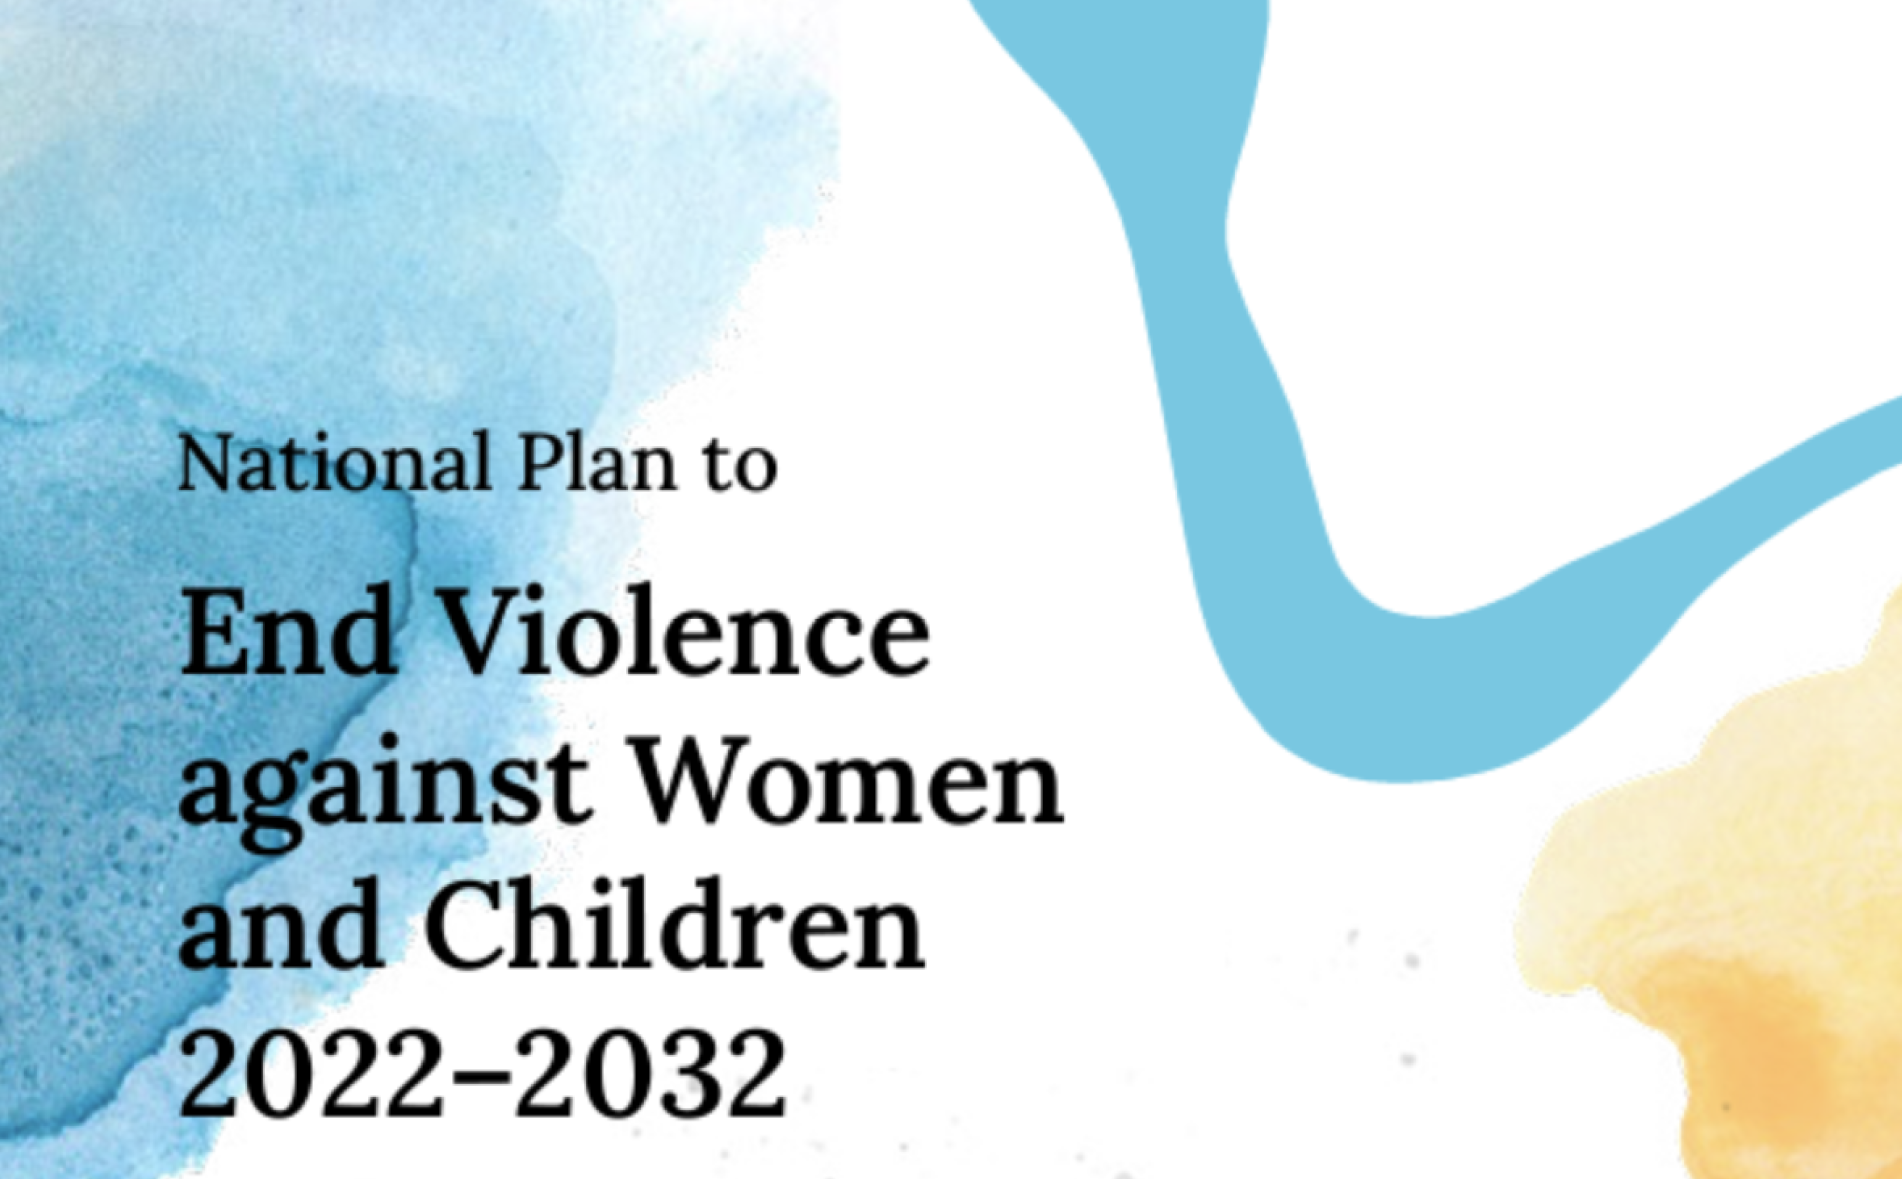 Release of the National Plan to End Violence Against Women and Children